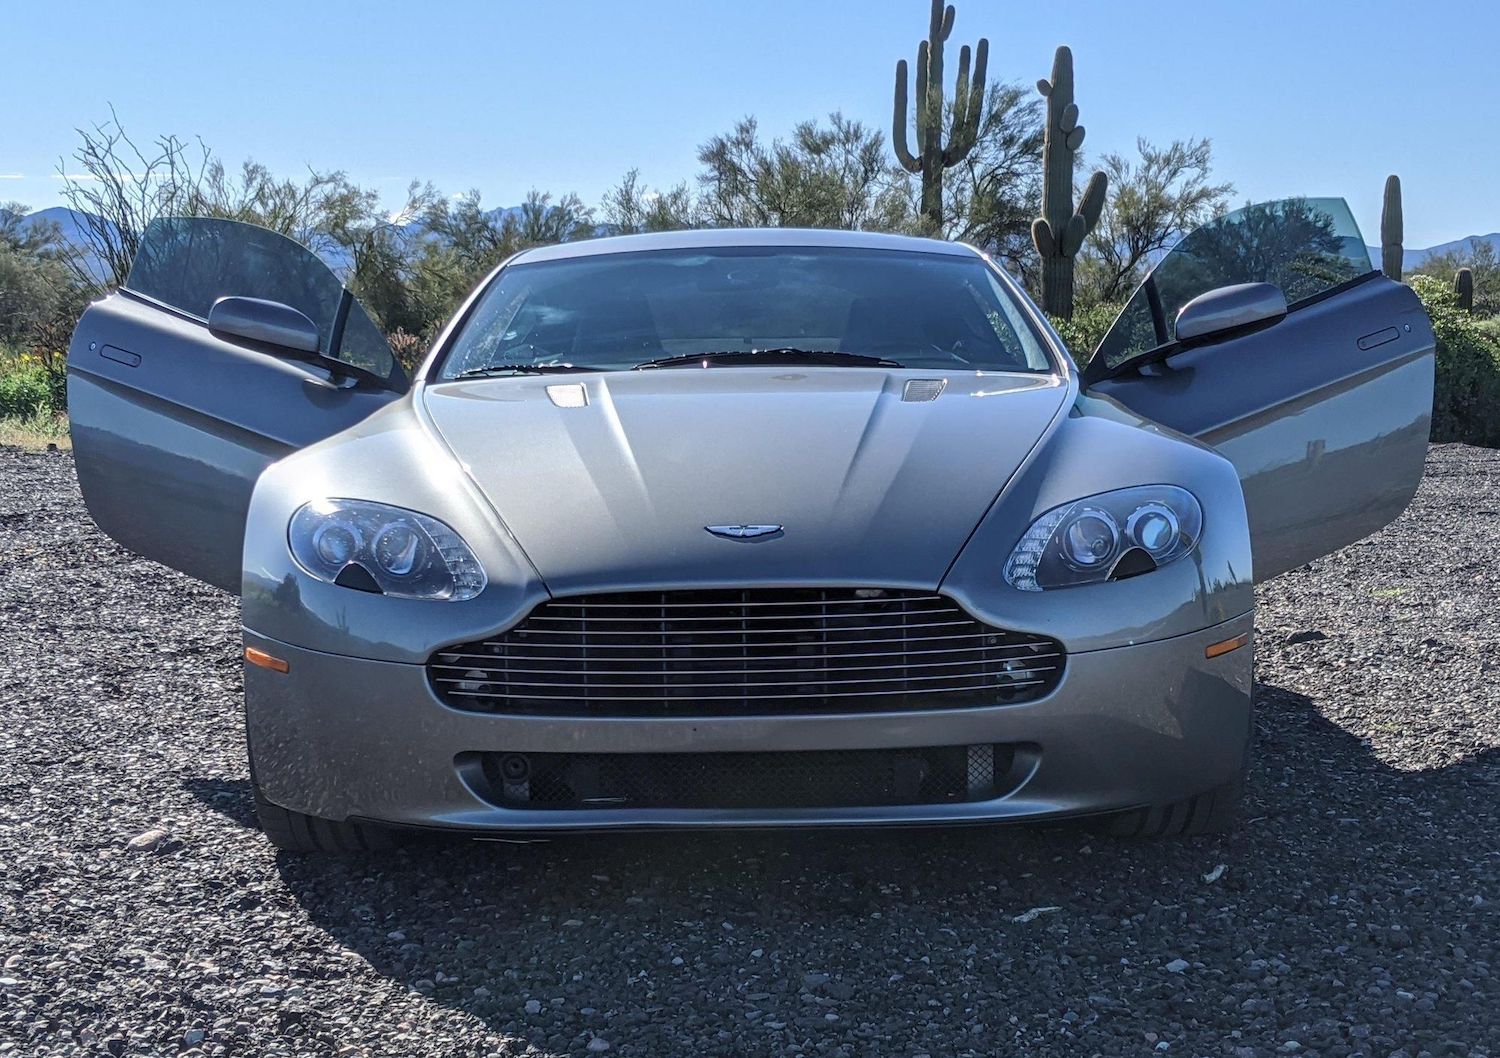 The grille of a used silver Aston Martin Vantage supercar with its doors open, cactuses visible in the background.